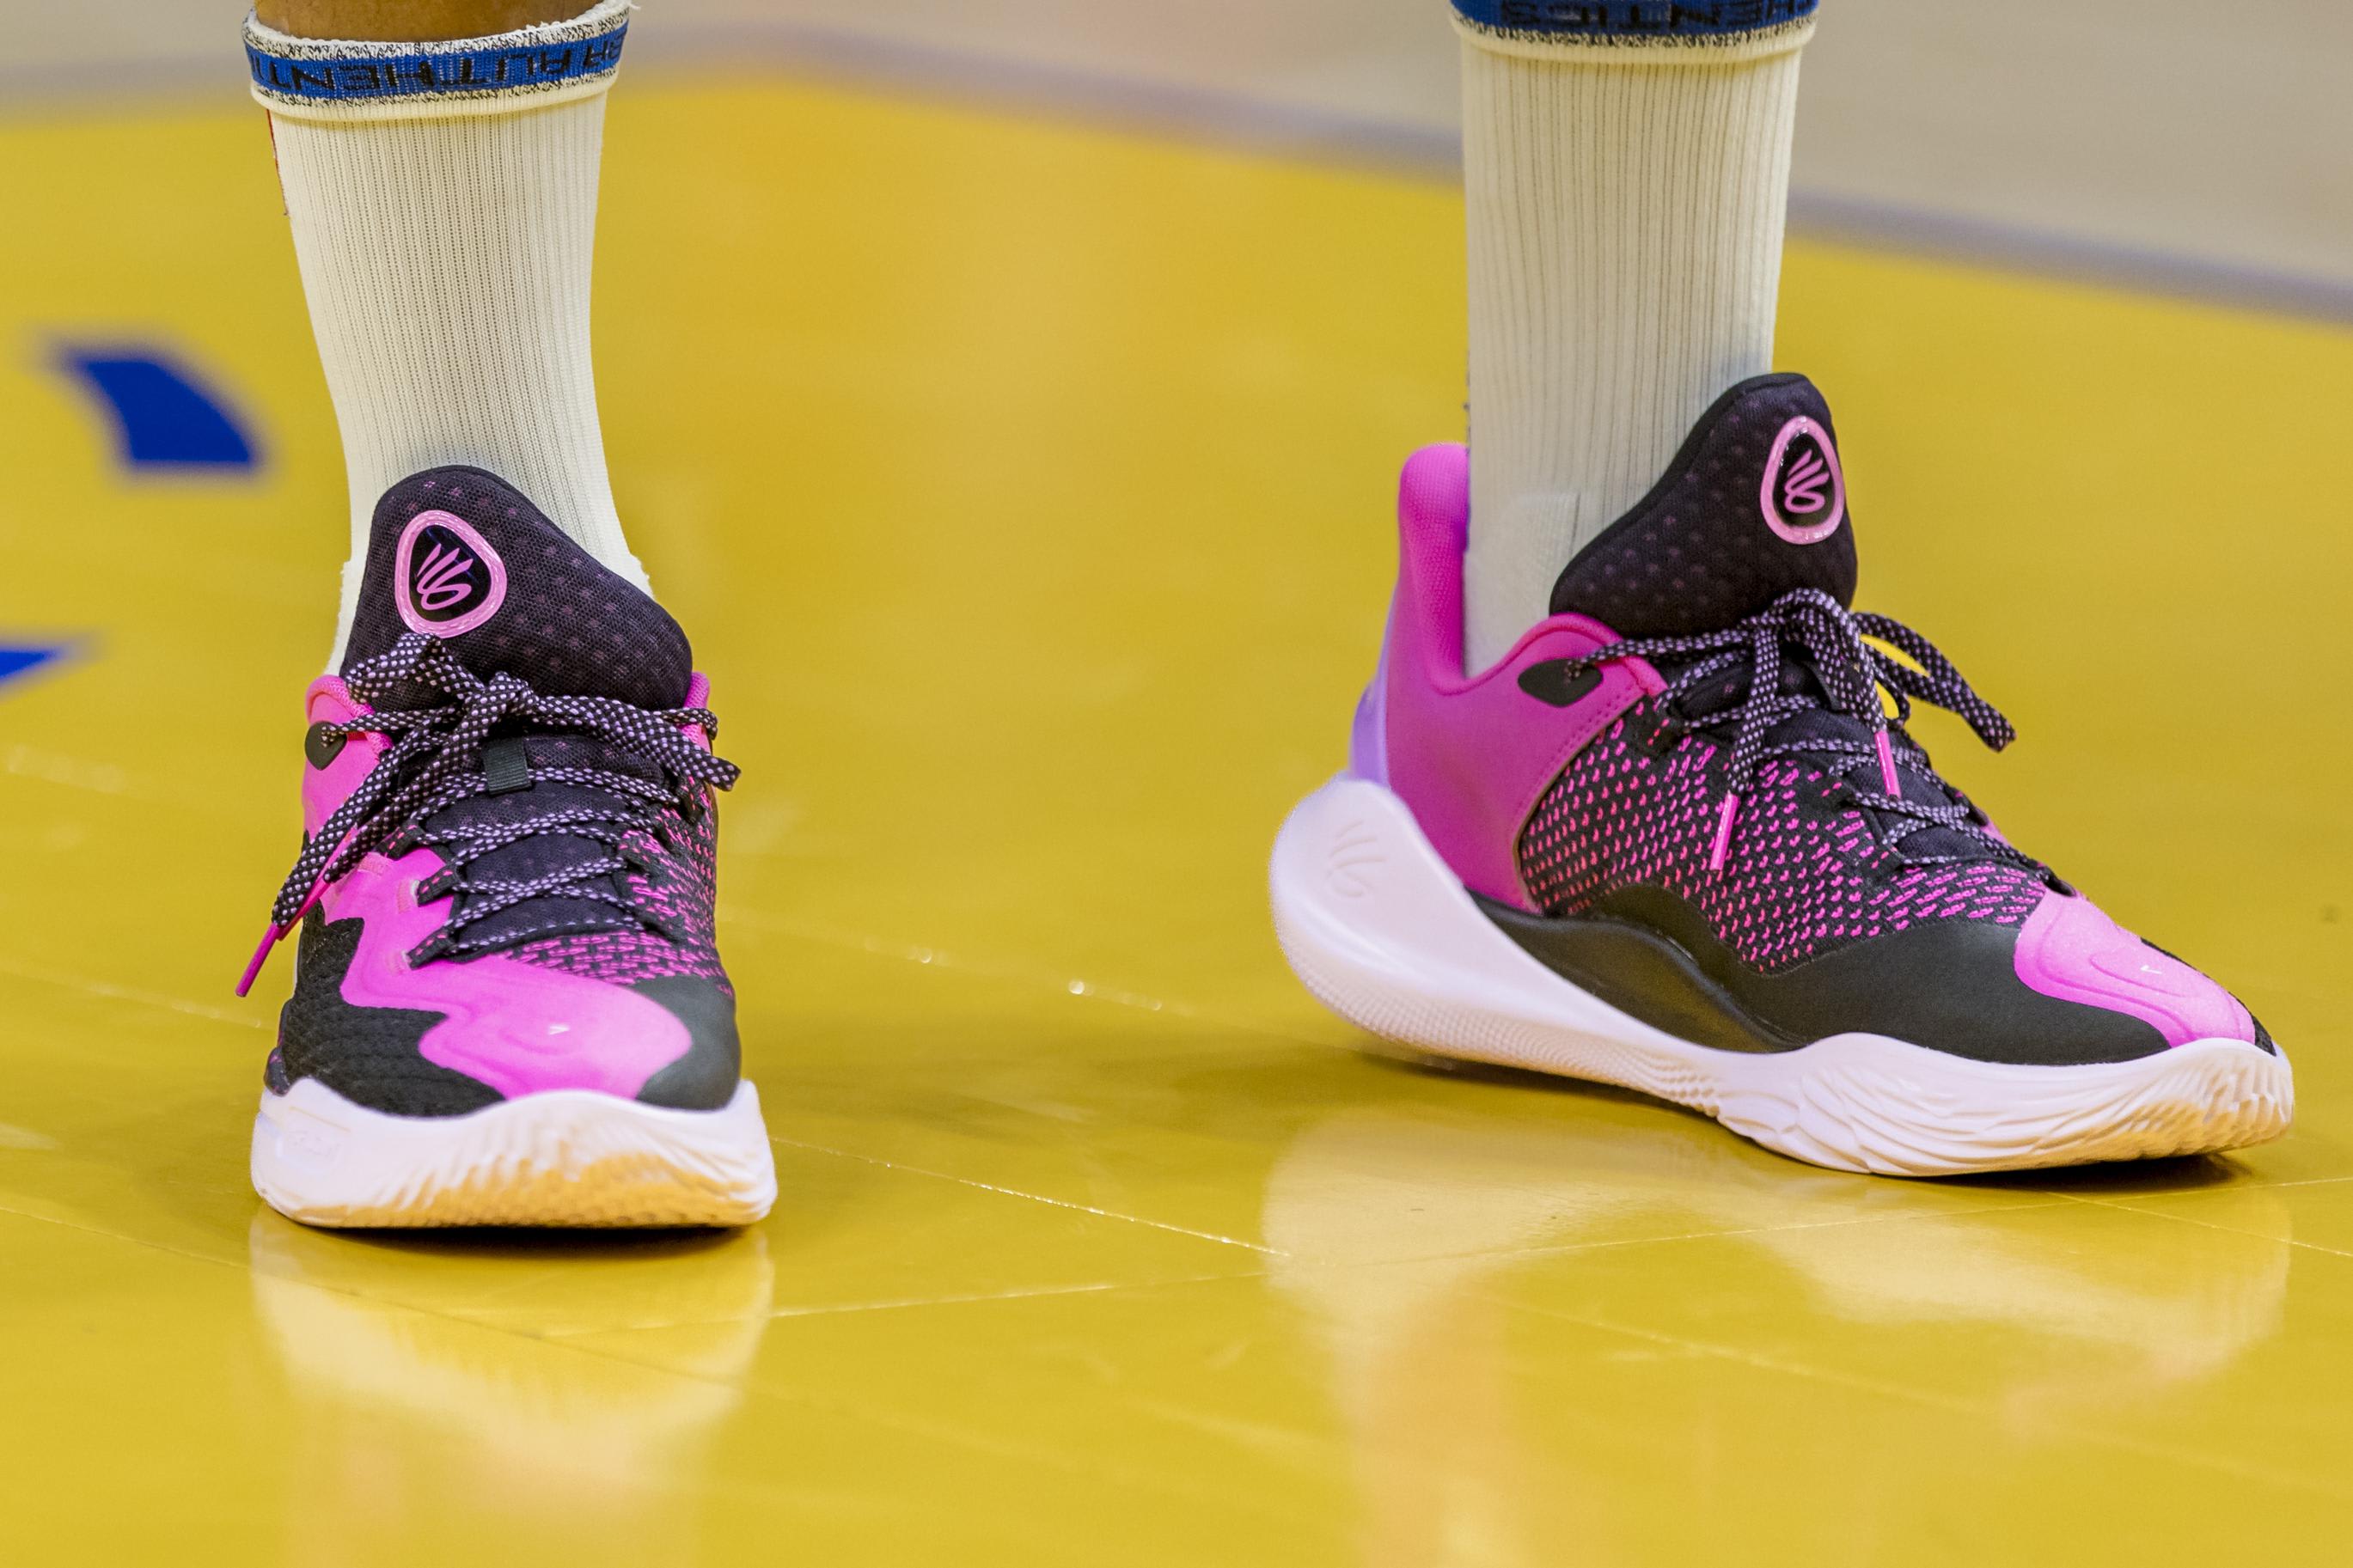 Golden State Warriors guard Stephen Curry's pink Under Armour sneakers.